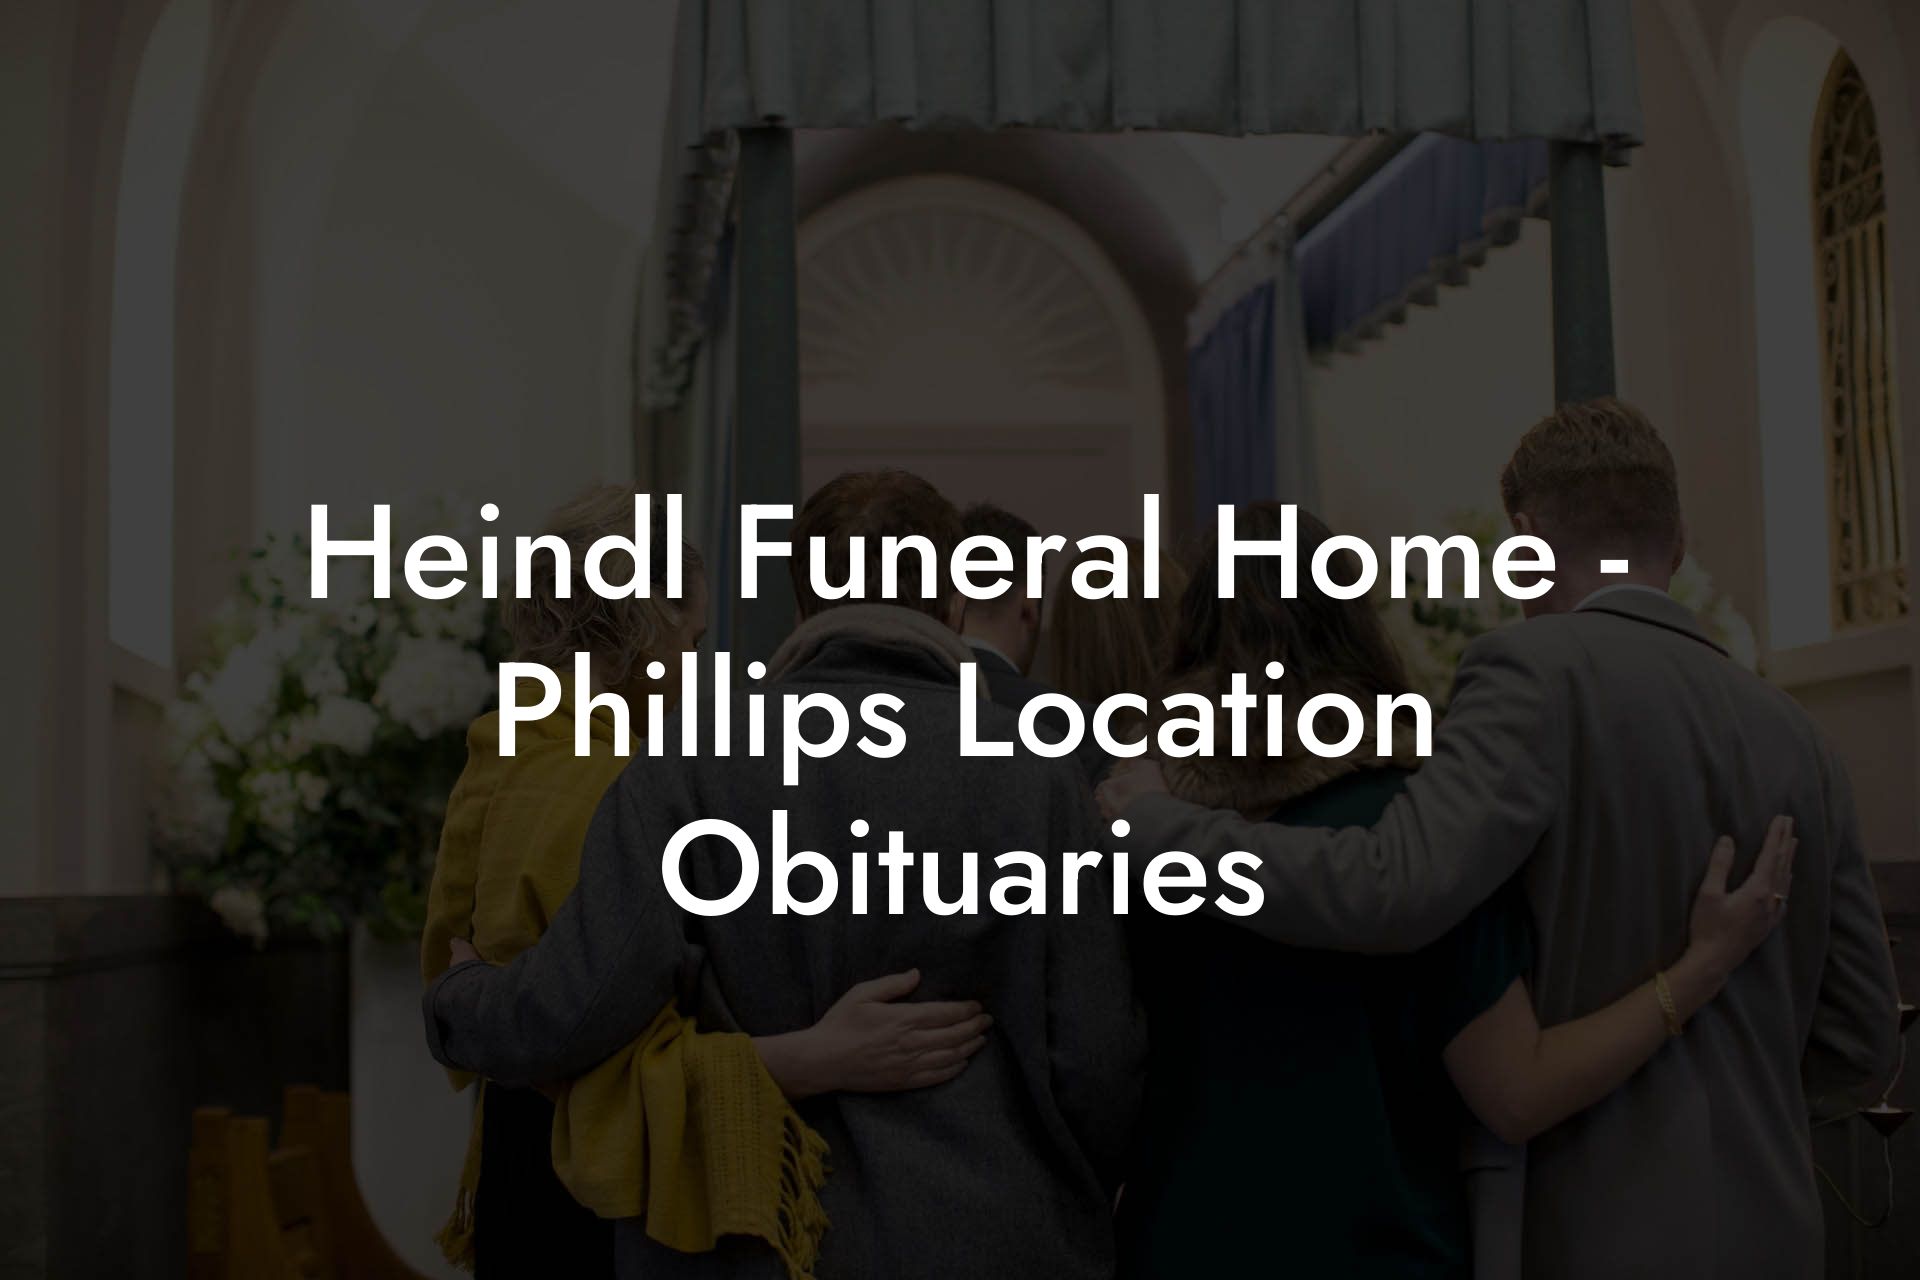 Heindl Funeral Home - Phillips Location Obituaries